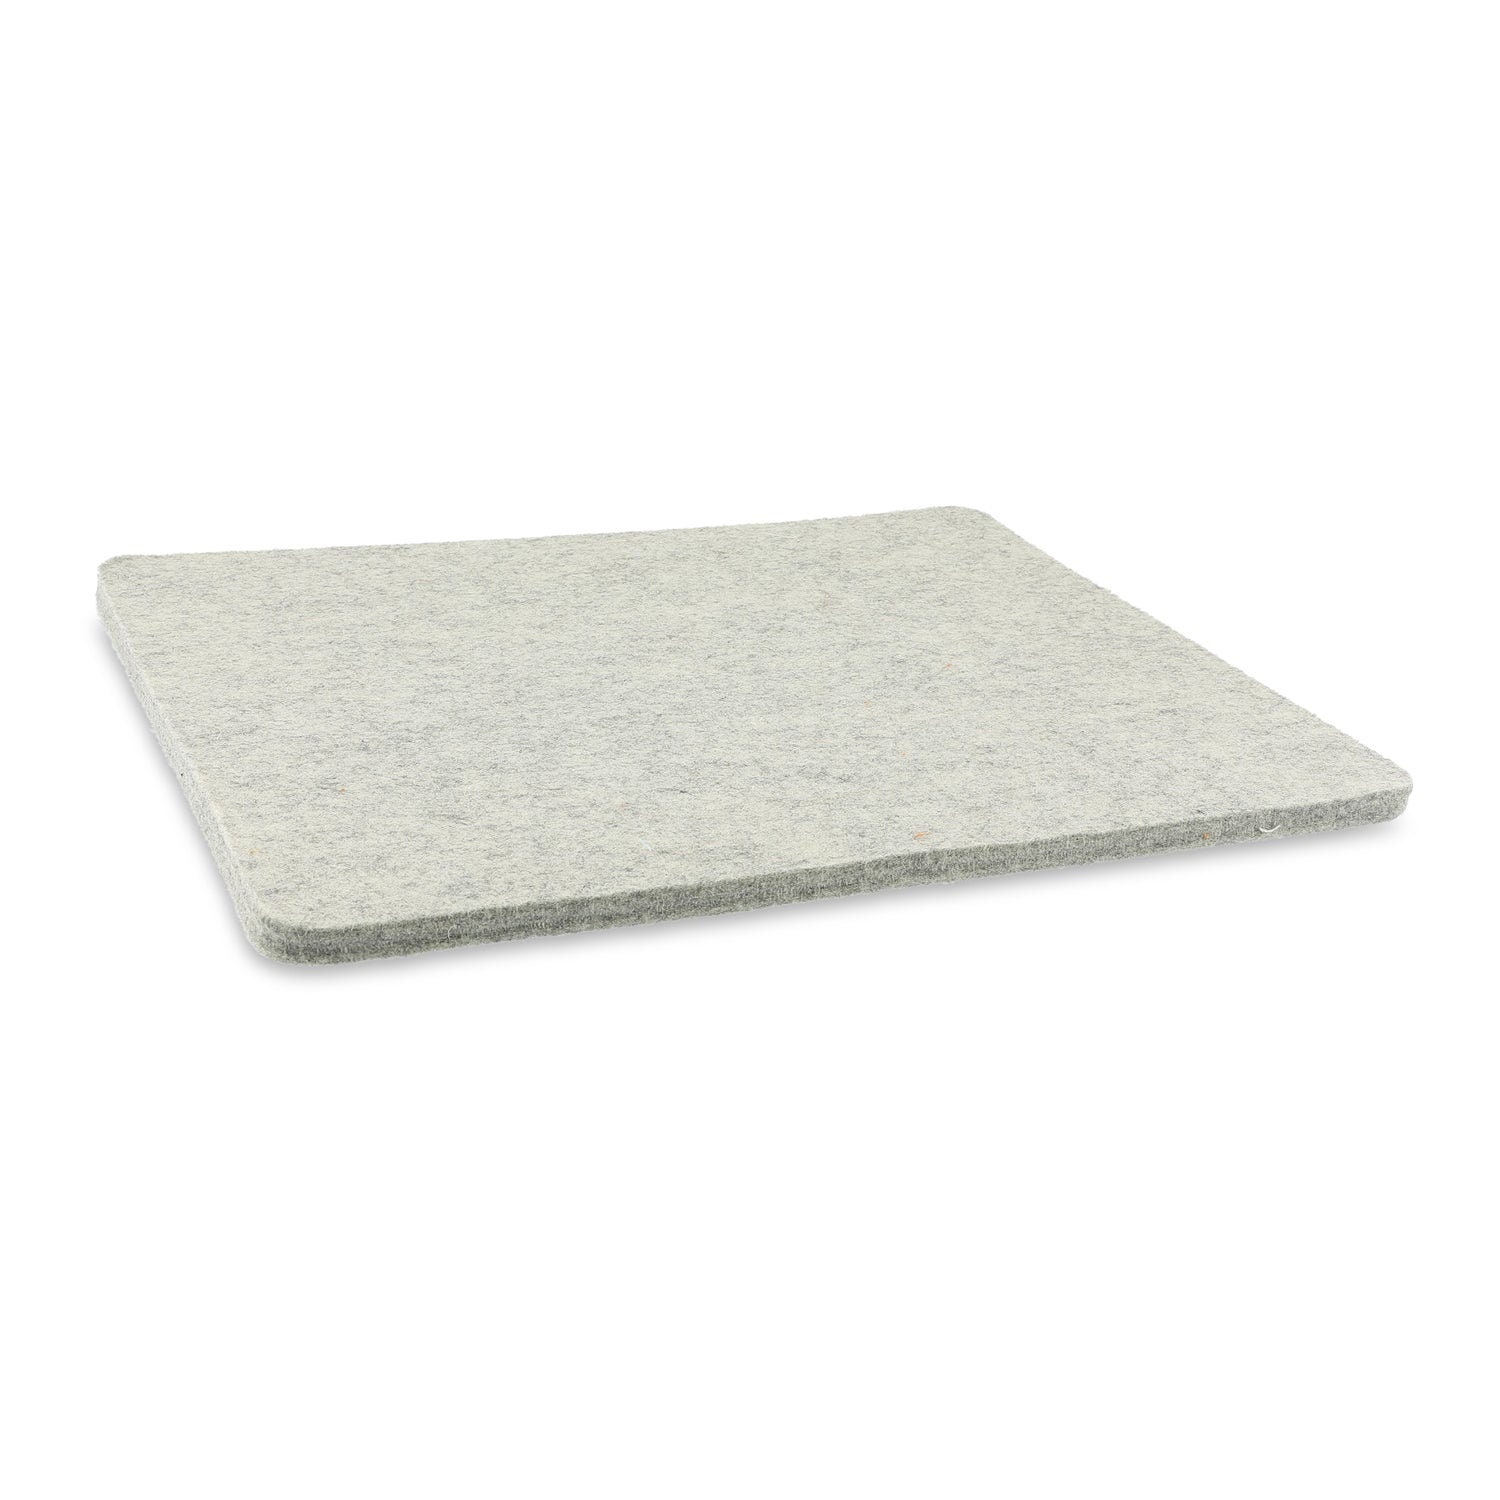 Wool Pressing Mat for Quilting 18 x 24” Plus 10 x 10 Portable Size - Thick  Quilters Ironing Pad for Embroidery and Patchwork